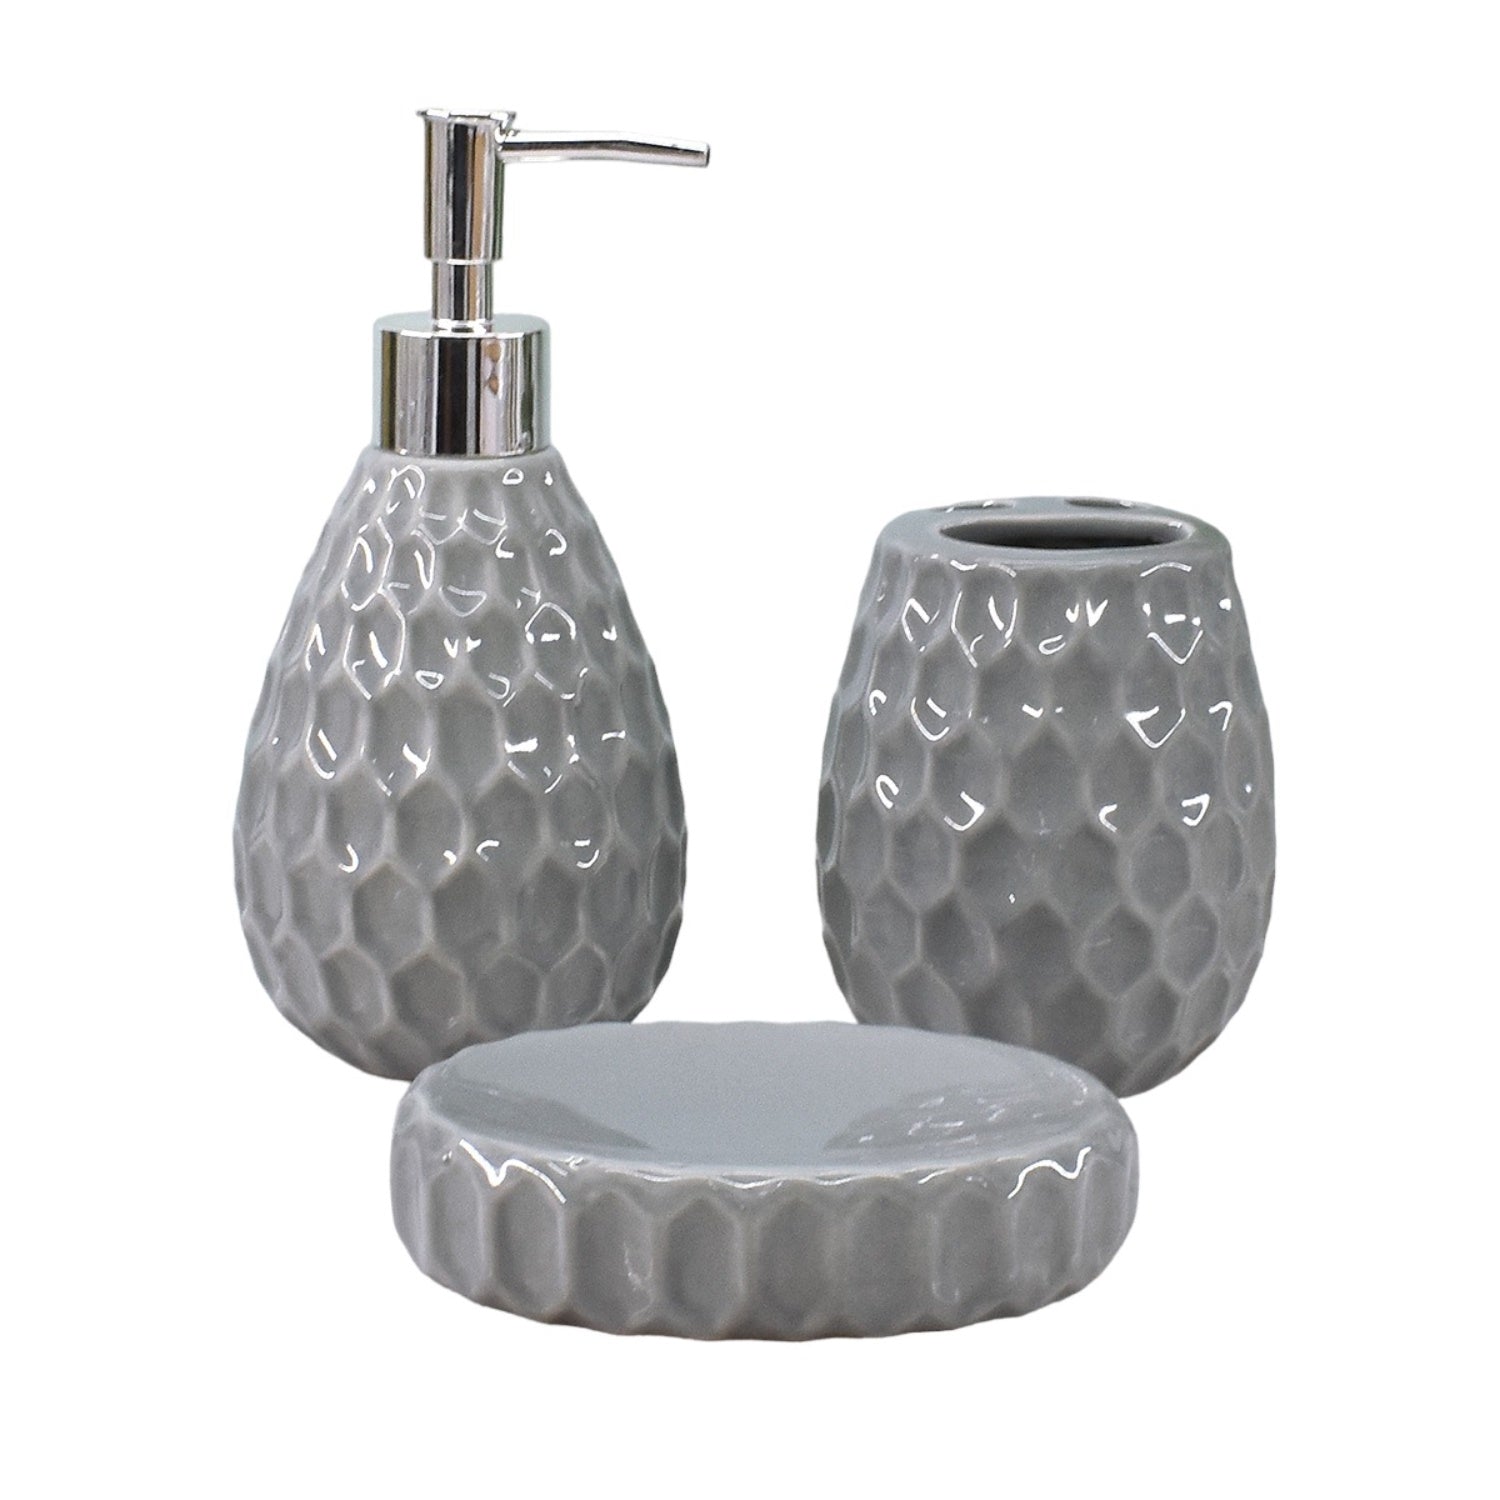 Ceramic Soap Dispenser Set with Toothbrush Holder and Soap Dish, Set of 3 Bathroom Accessories for Home (C3005)